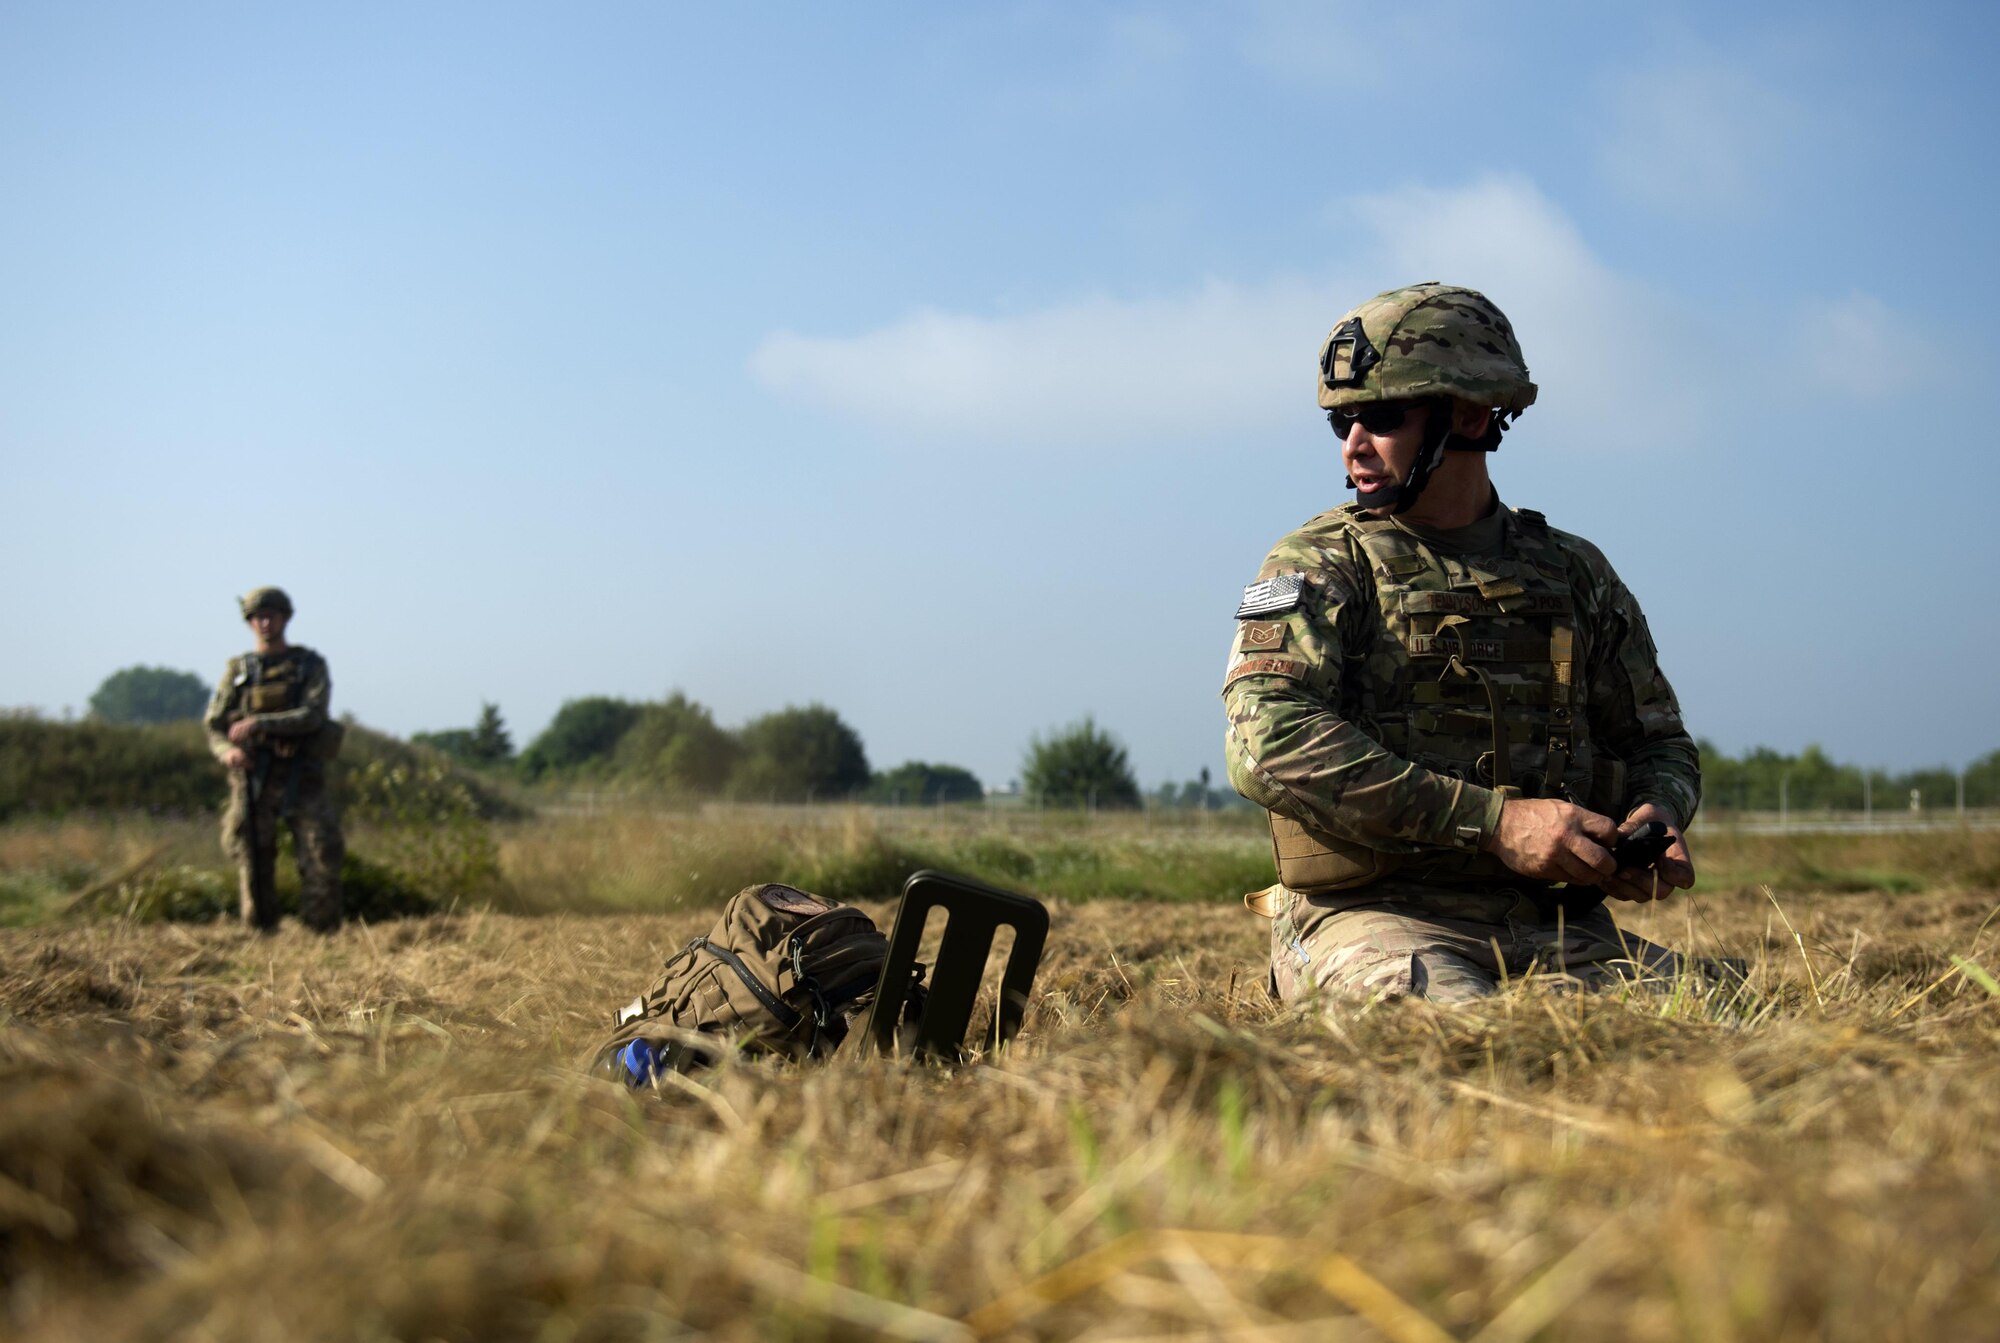 U.S. Air Force Tech. Sgt. Ryan Tennyson, 52nd Civil Engineer Squadron explosive ordnance disposal team leader, right, and Senior Airman Douglas Wilkens, 52nd CES EOD team member, left, work together to find simulated improvised explosive devices during an IED Rodeo exercise at Spangdahlem Air Base, Germany, July 27, 2016. This multilateral exercise focused on locating and disarming improvised explosive devices which involved EOD members from the U.S., Czech Republic, Germany and Belgium. (U.S. Air Force photo by Airman 1st Class Preston L. Cherry/Realeased)